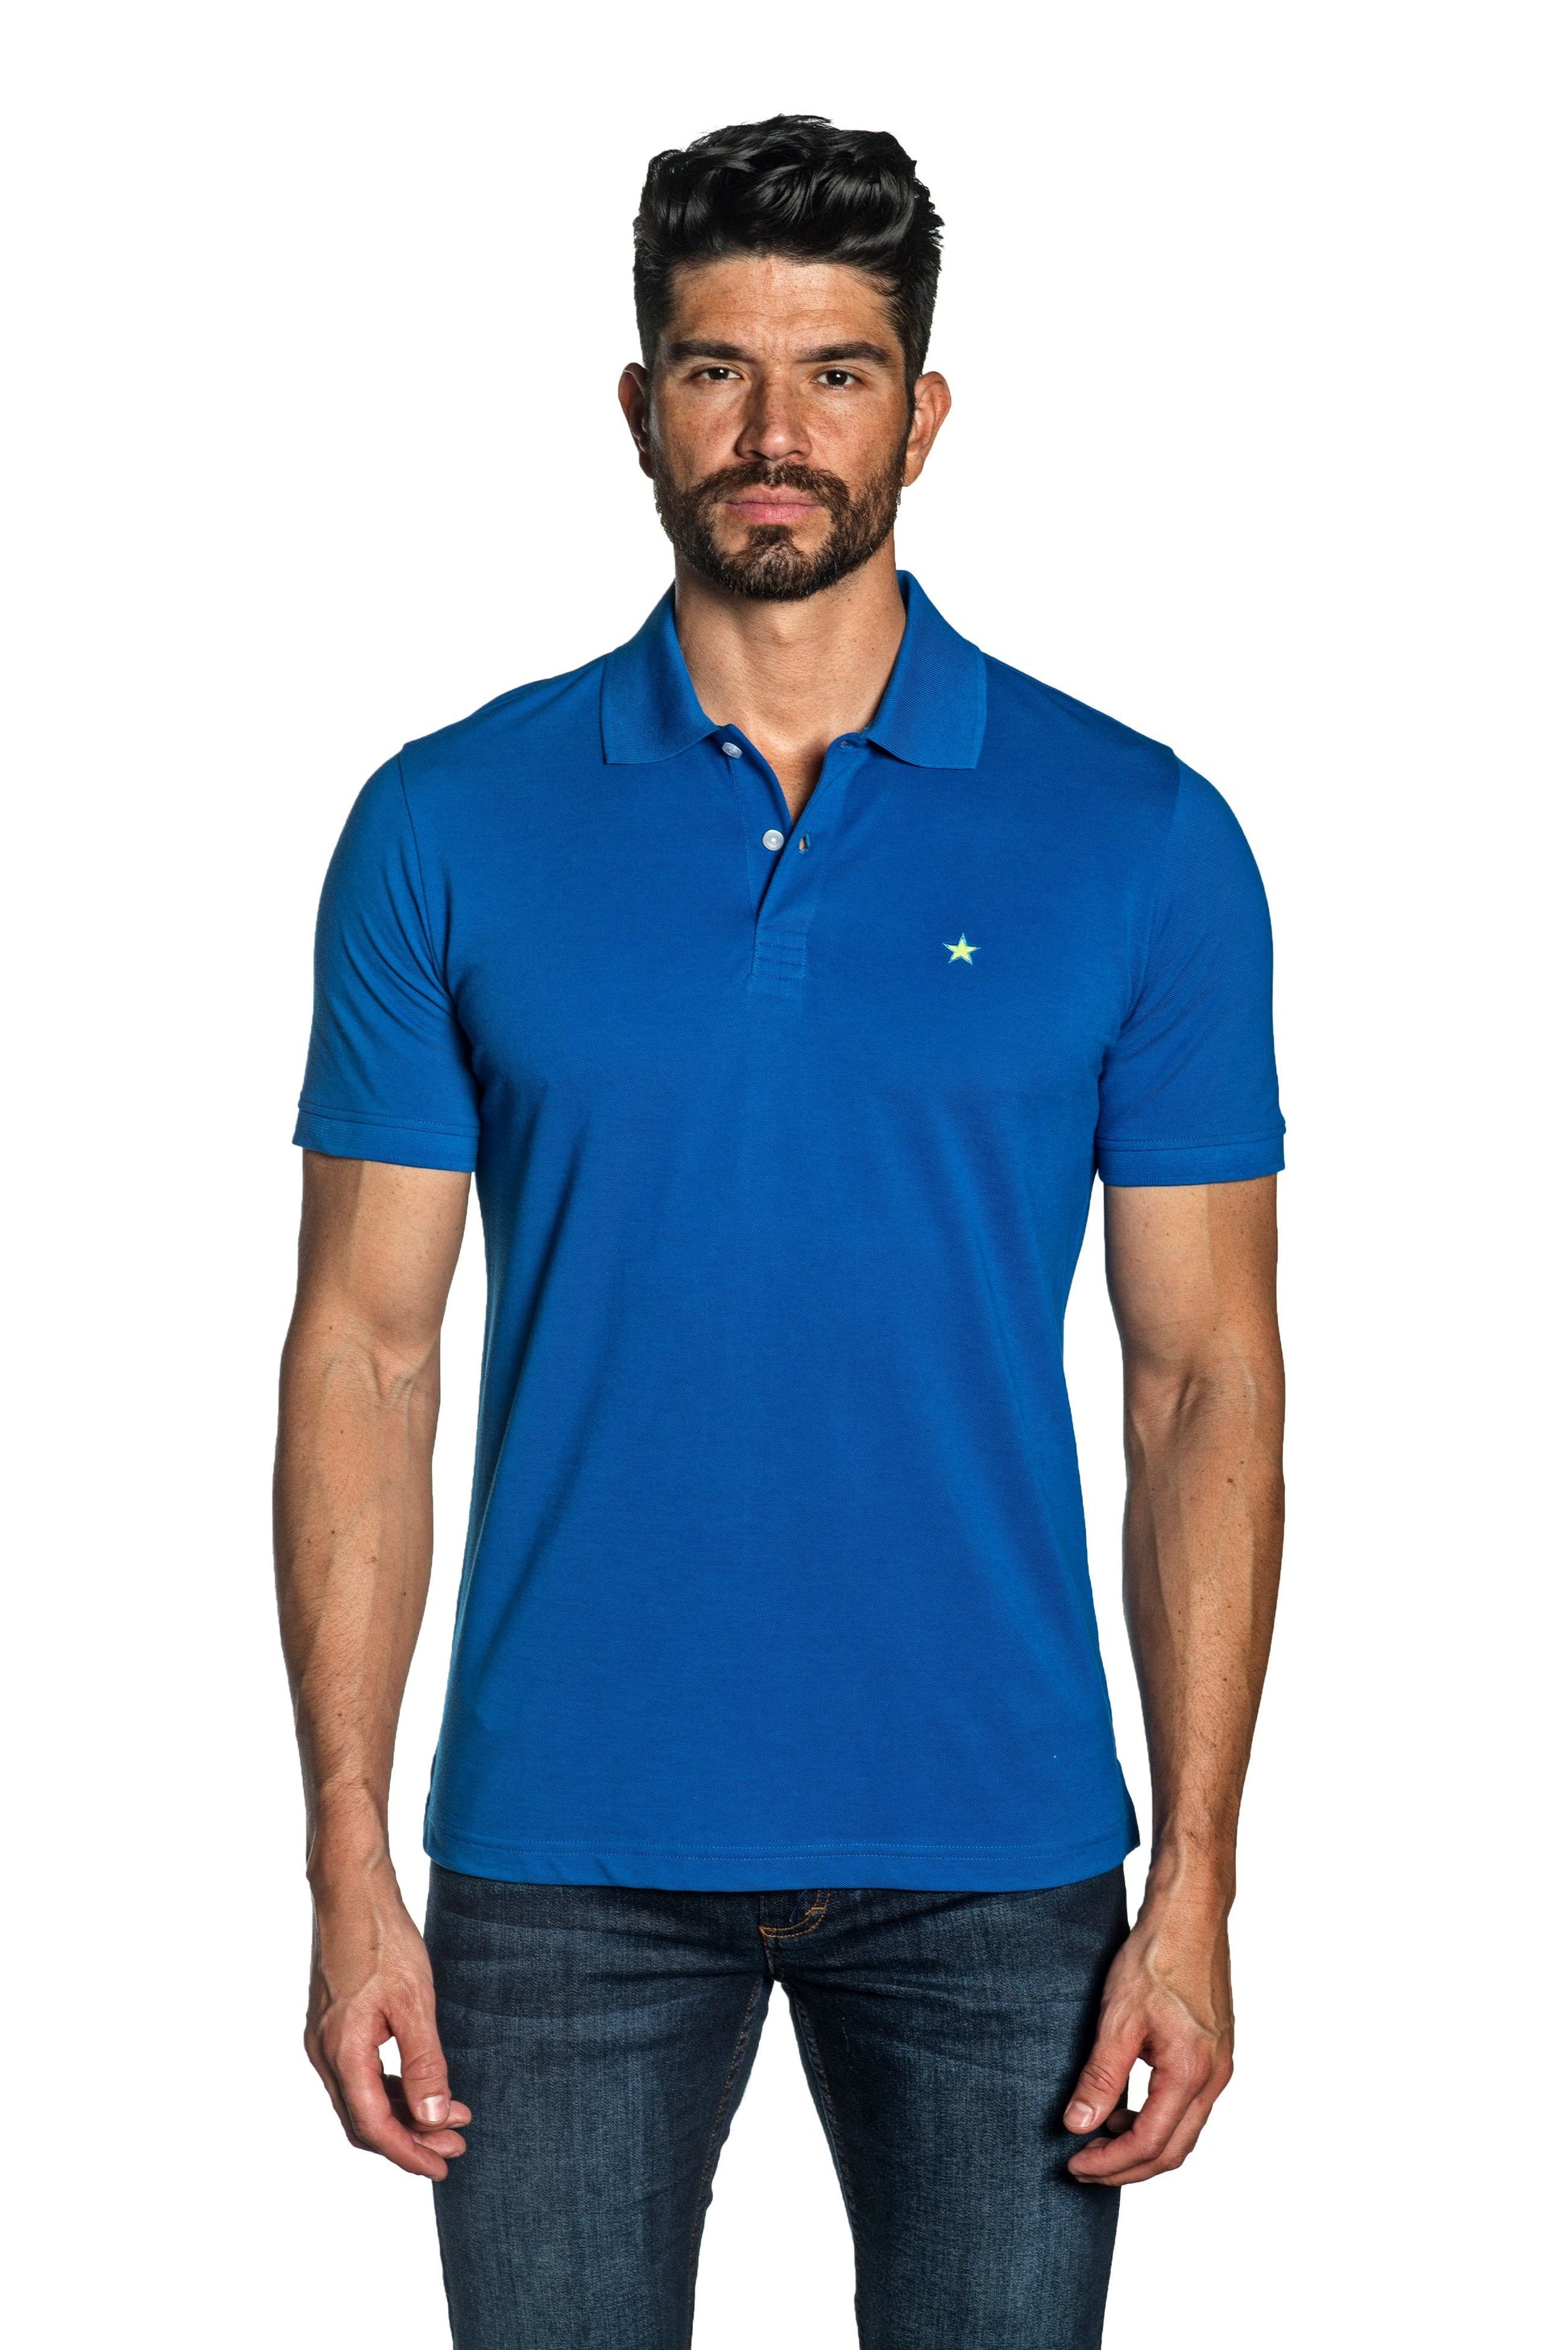 Blue Mens Polo With Star Embroidery P-28.